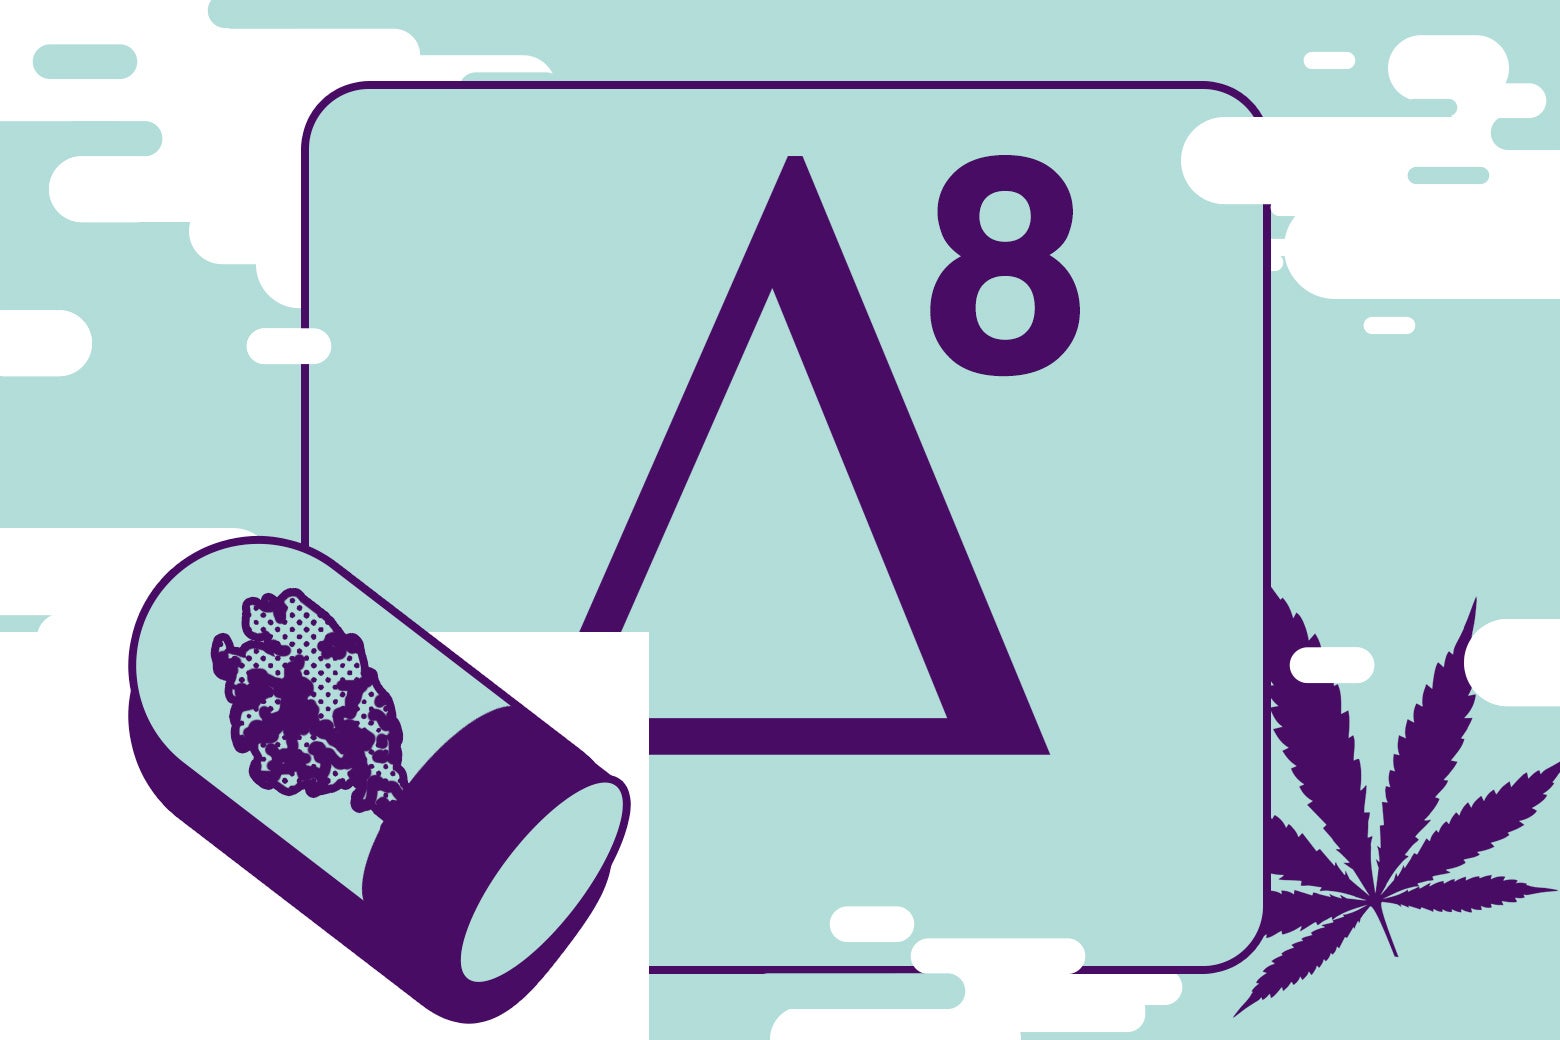 The delta-9 symbol is seen surrounded by a clear bottle of weed flour and a pot leaf.